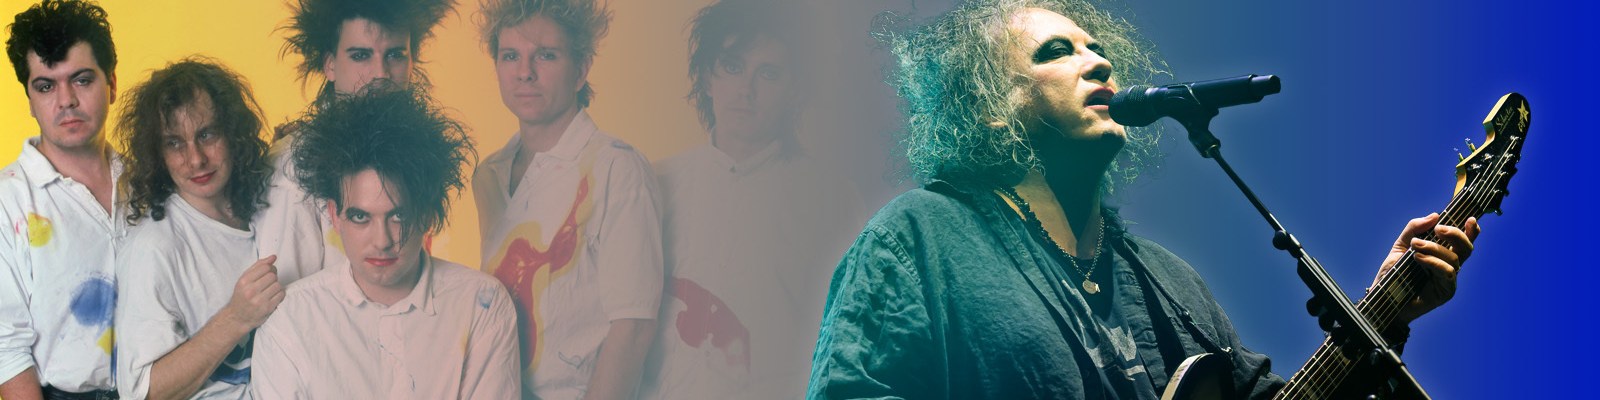 The Cure’s Best Songs, Ranked